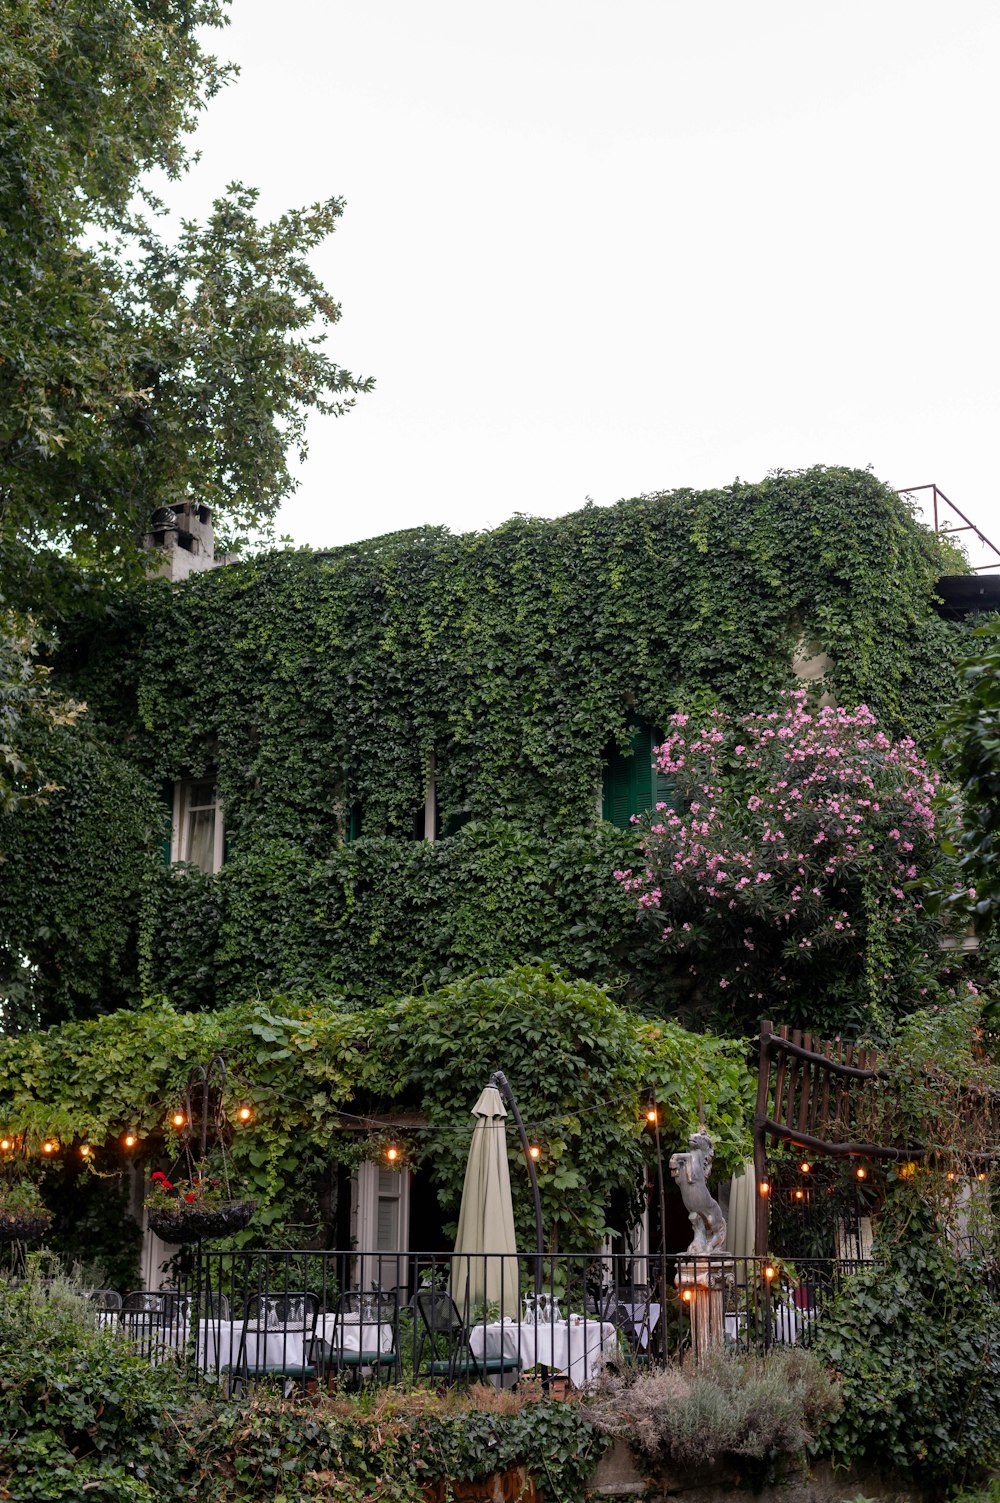 a building covered in vines with tables and umbrellas